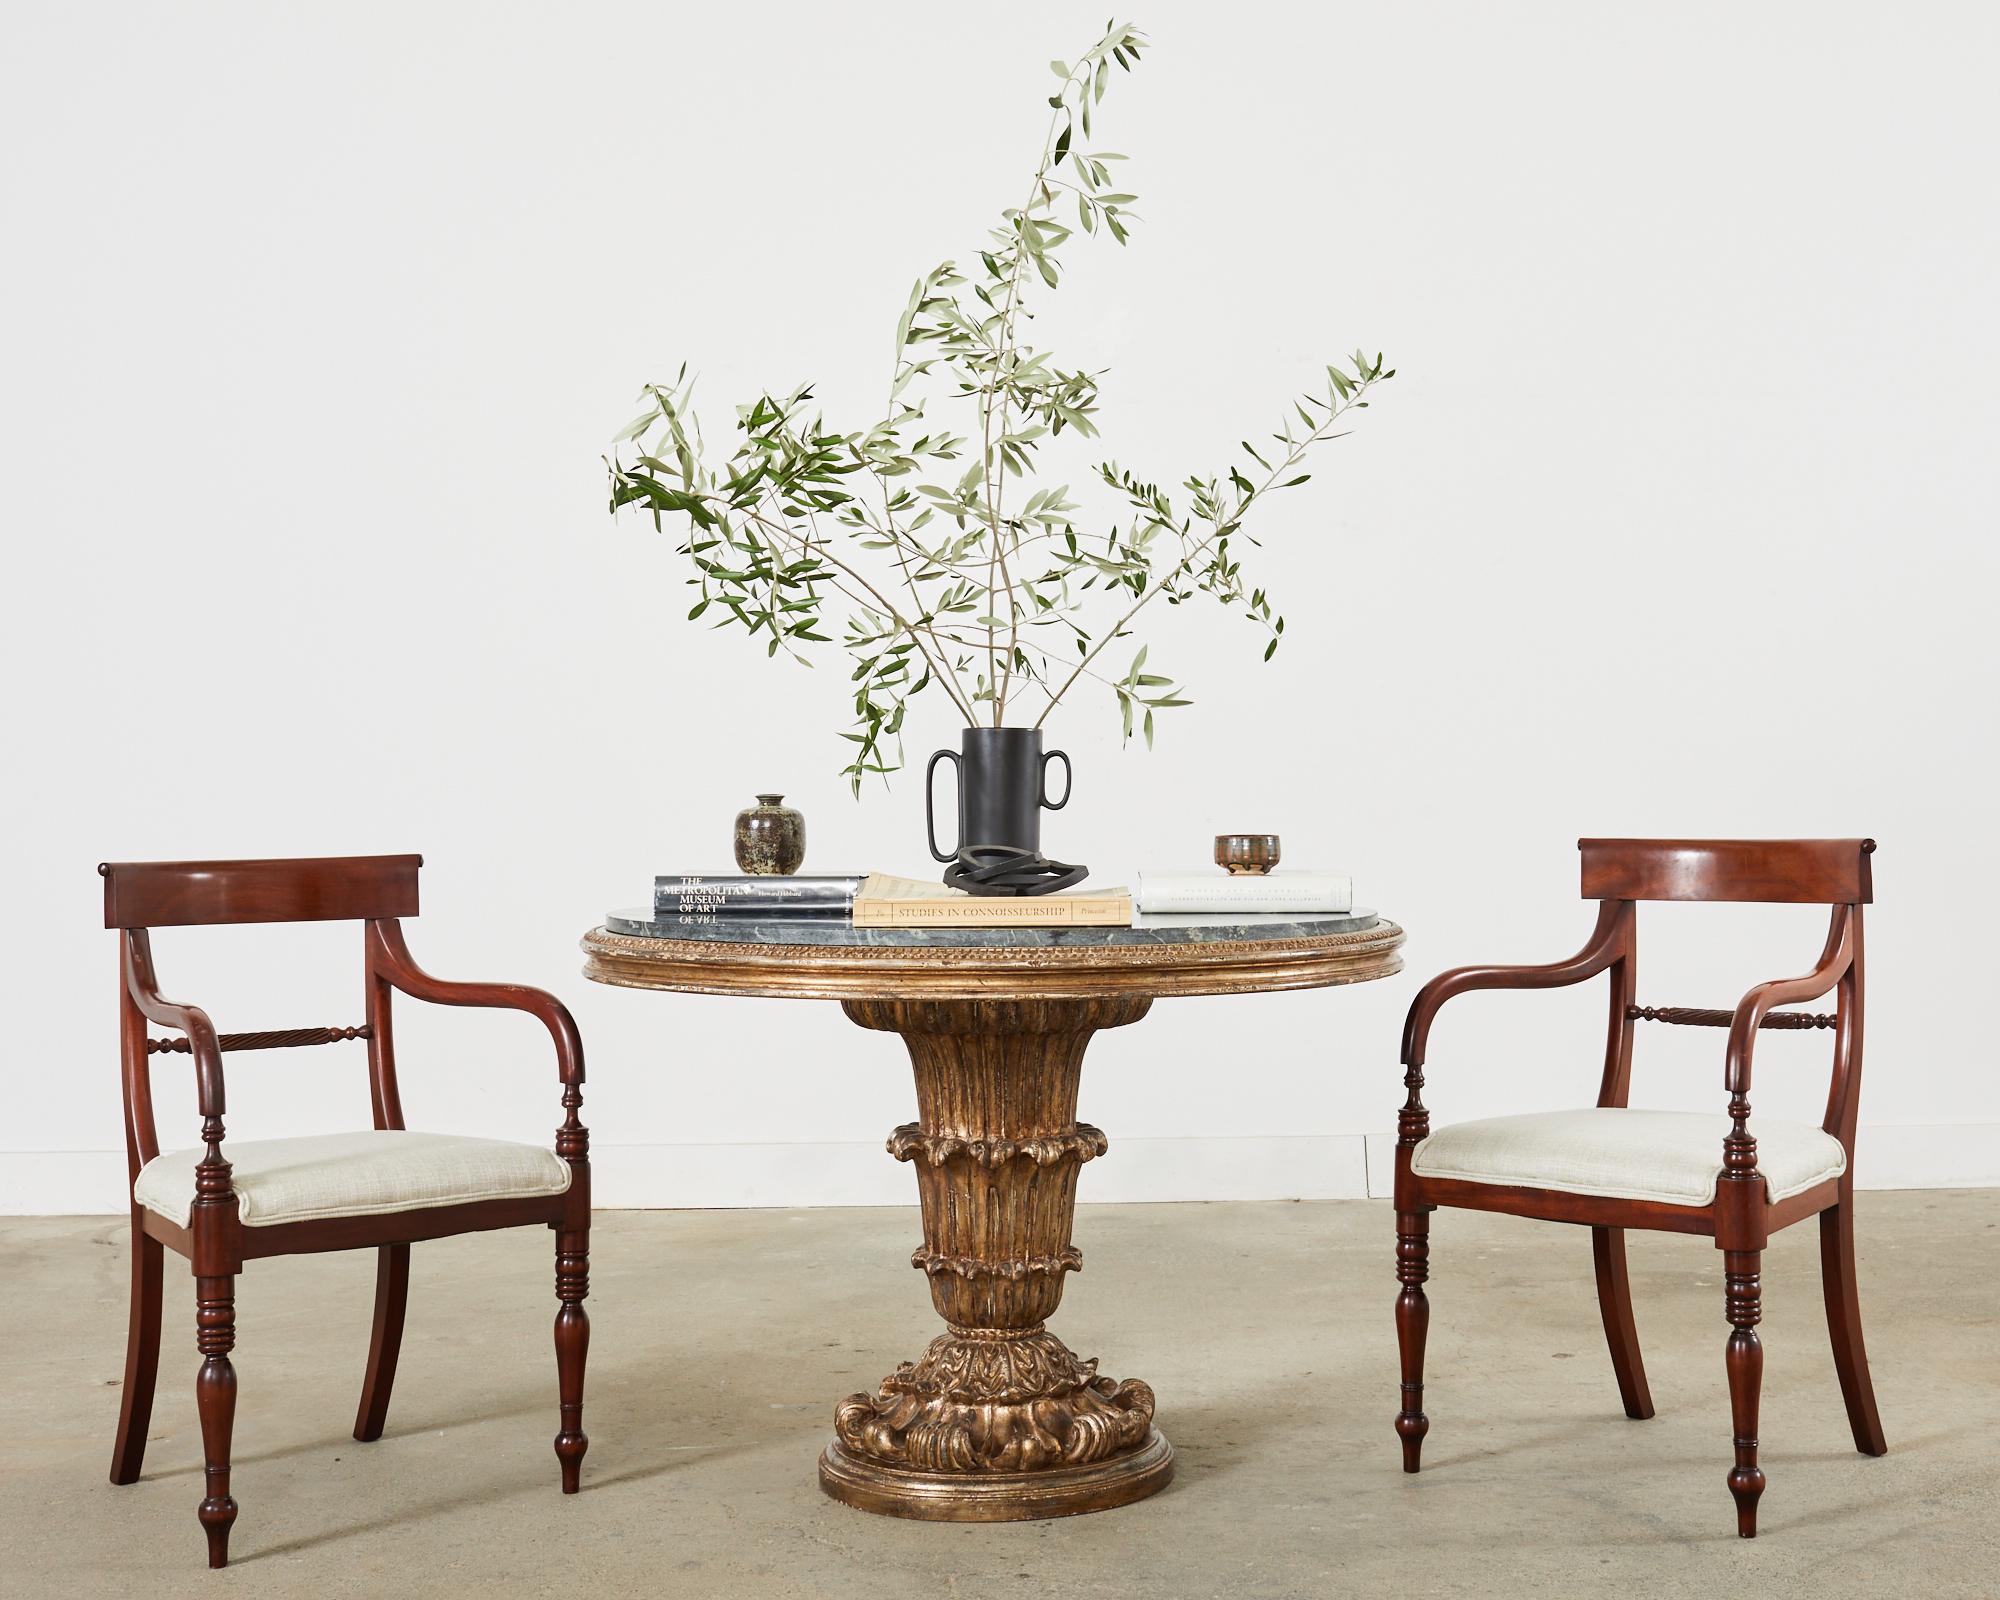 Grand set of twelve mahogany dining chairs made in the English regency taste. The deep mahogany frames have a Greek klismos inspired tablet back that gracefully curves down the back to saber legs. The set consists of  10 side chairs and two host